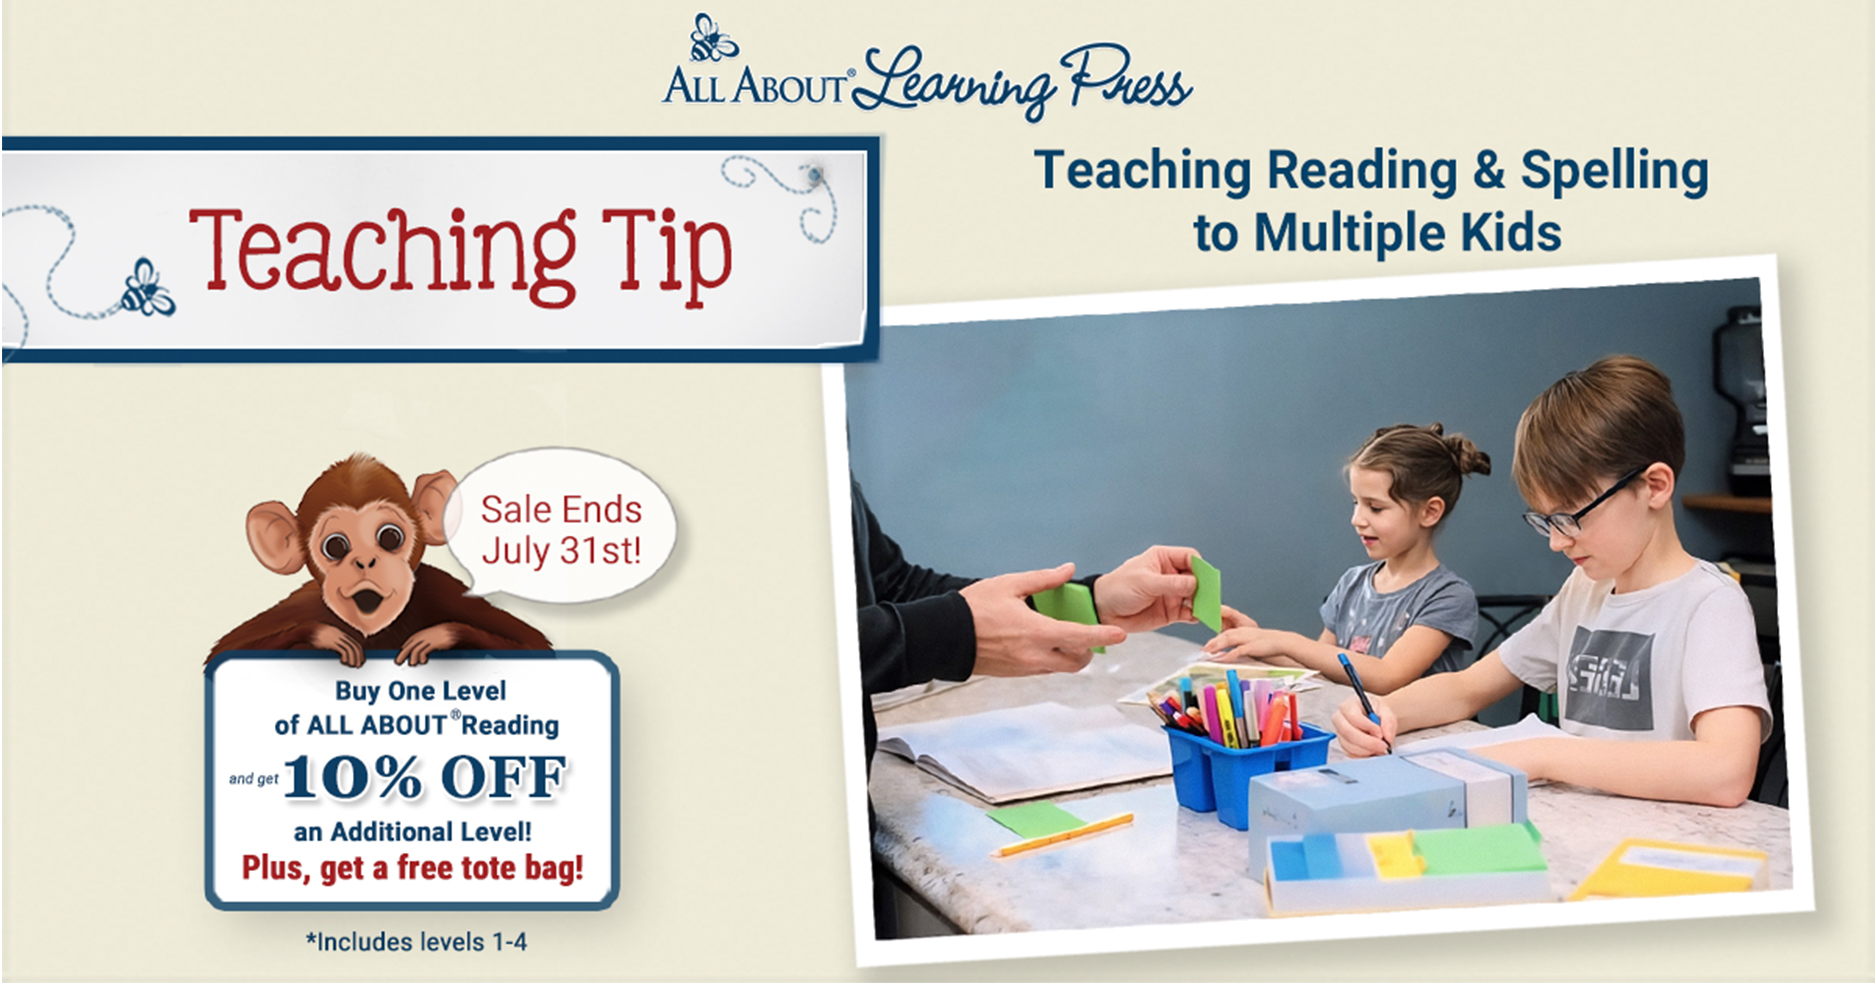 Buy one level of All About Reading and get 10% off an additional level!